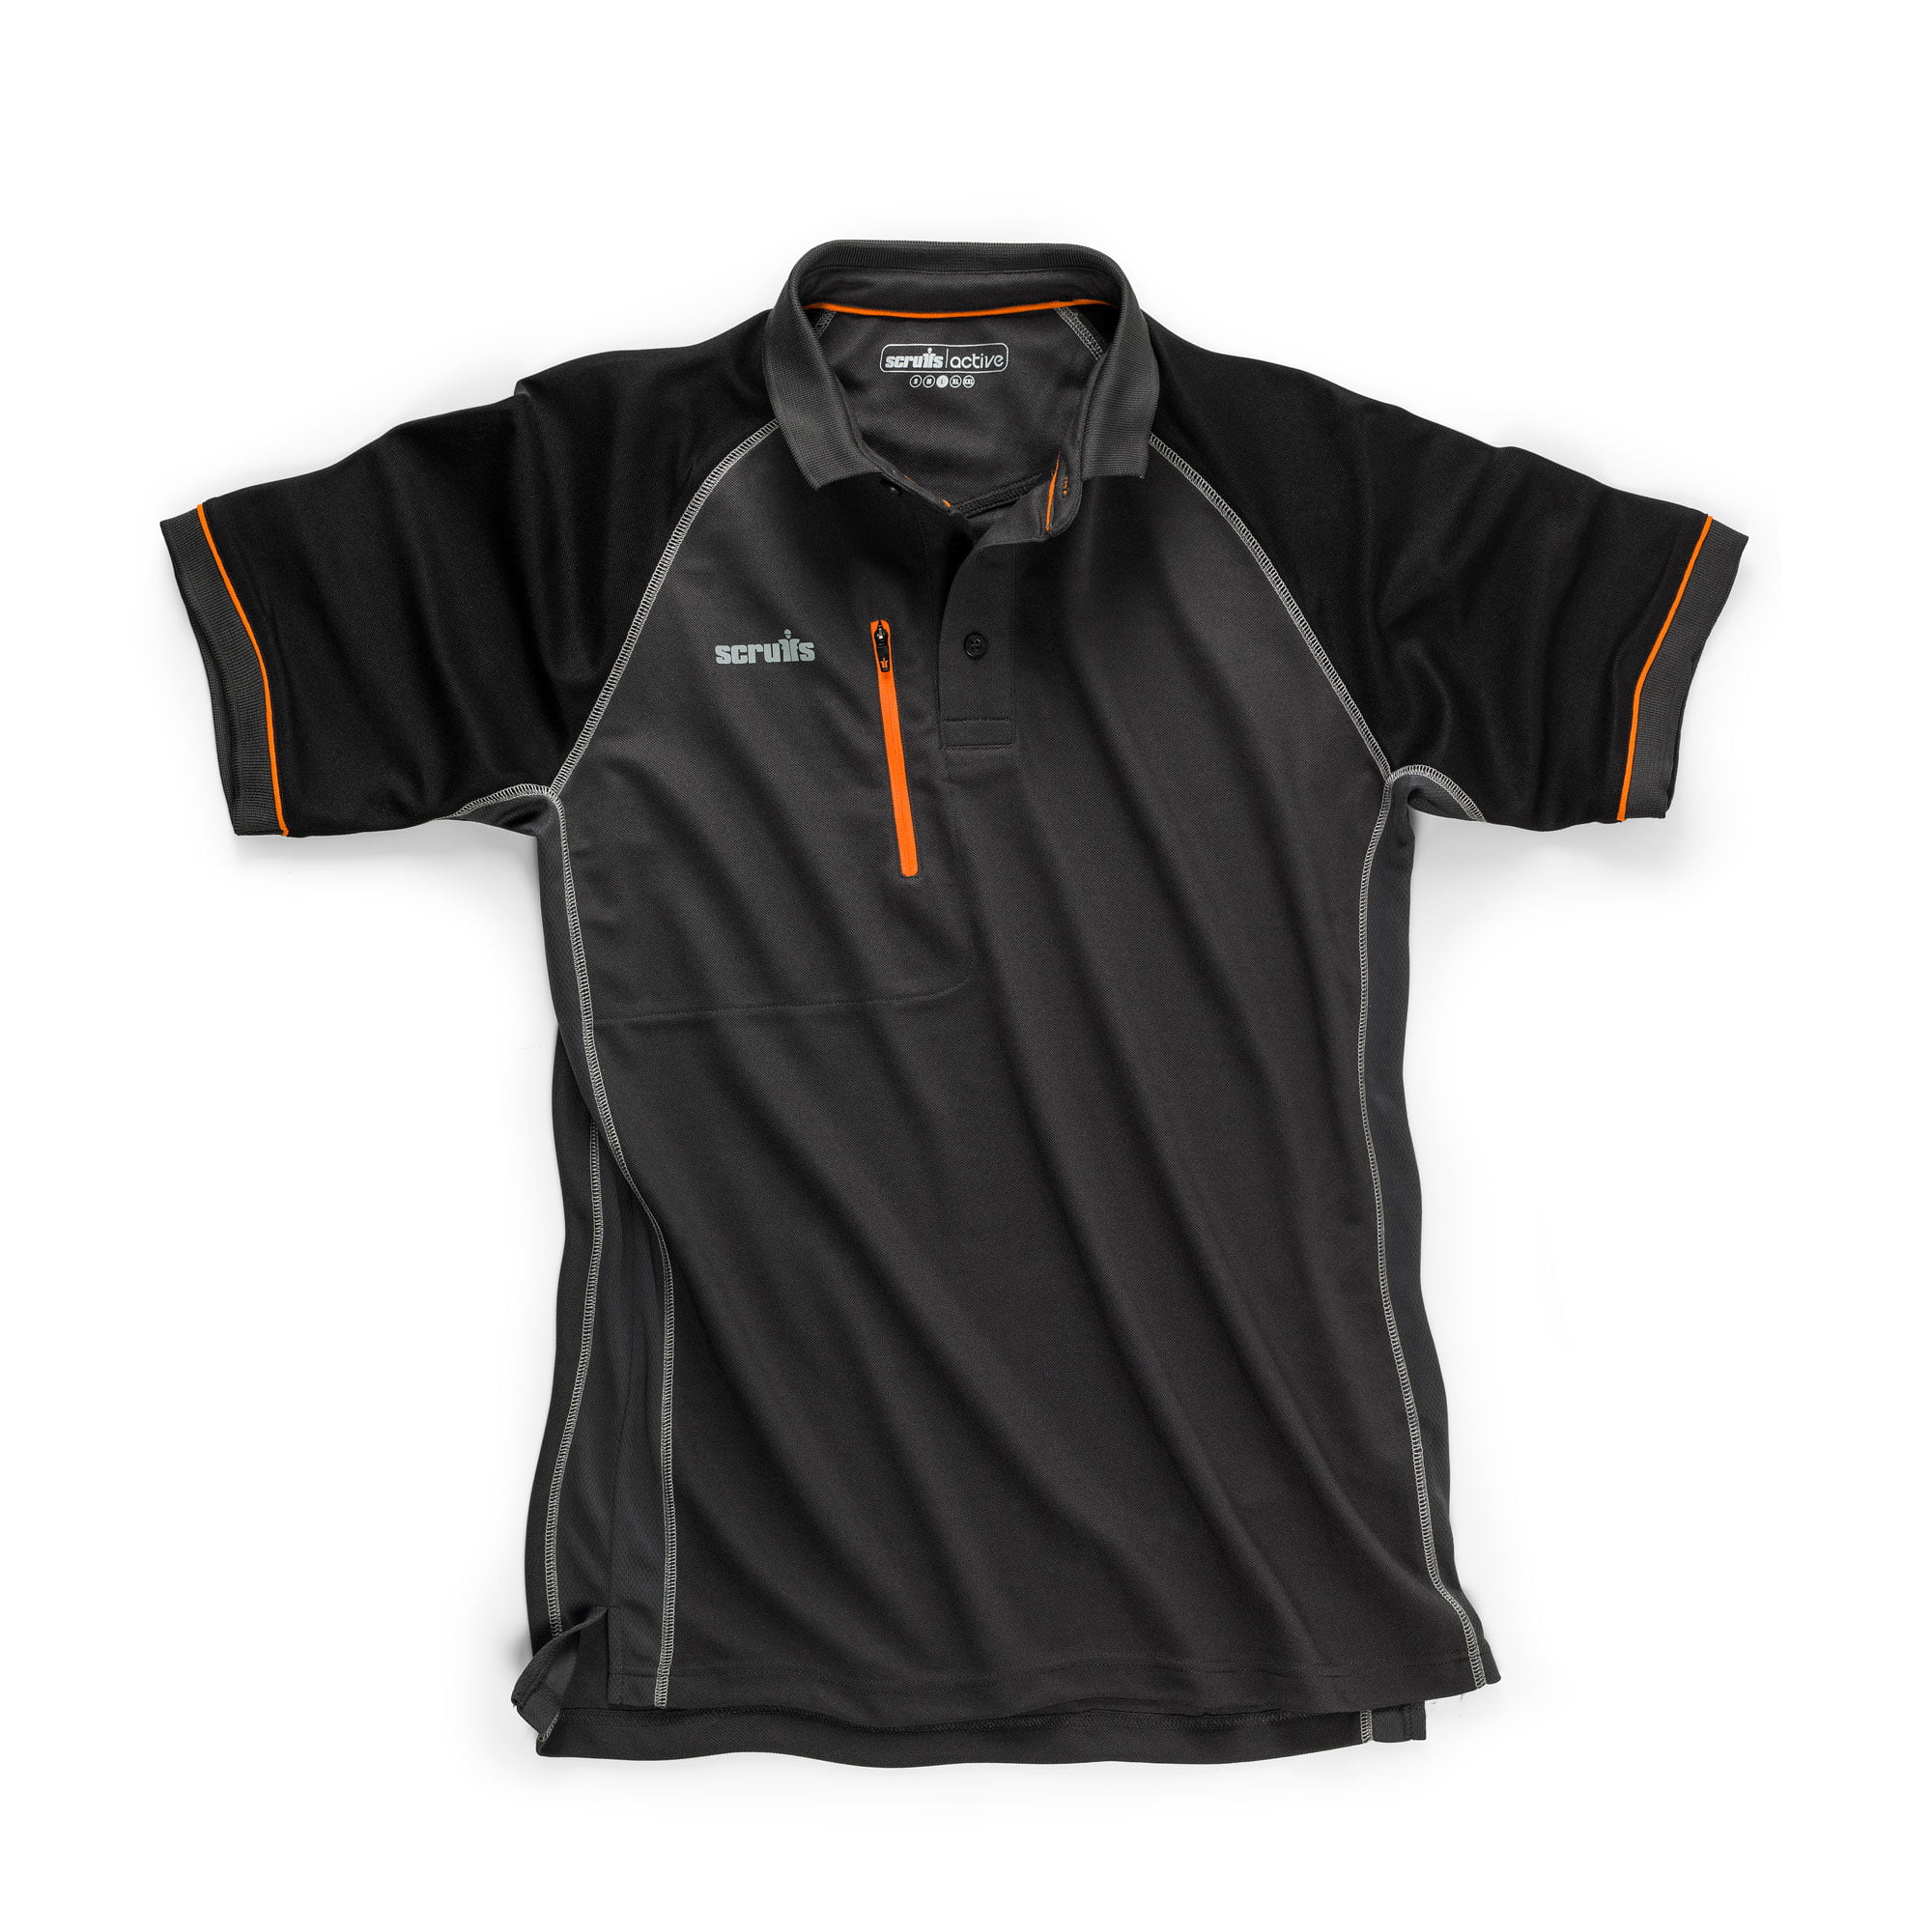 Scruffs grey polo with black sleeves and orange detail on sleeves and collar